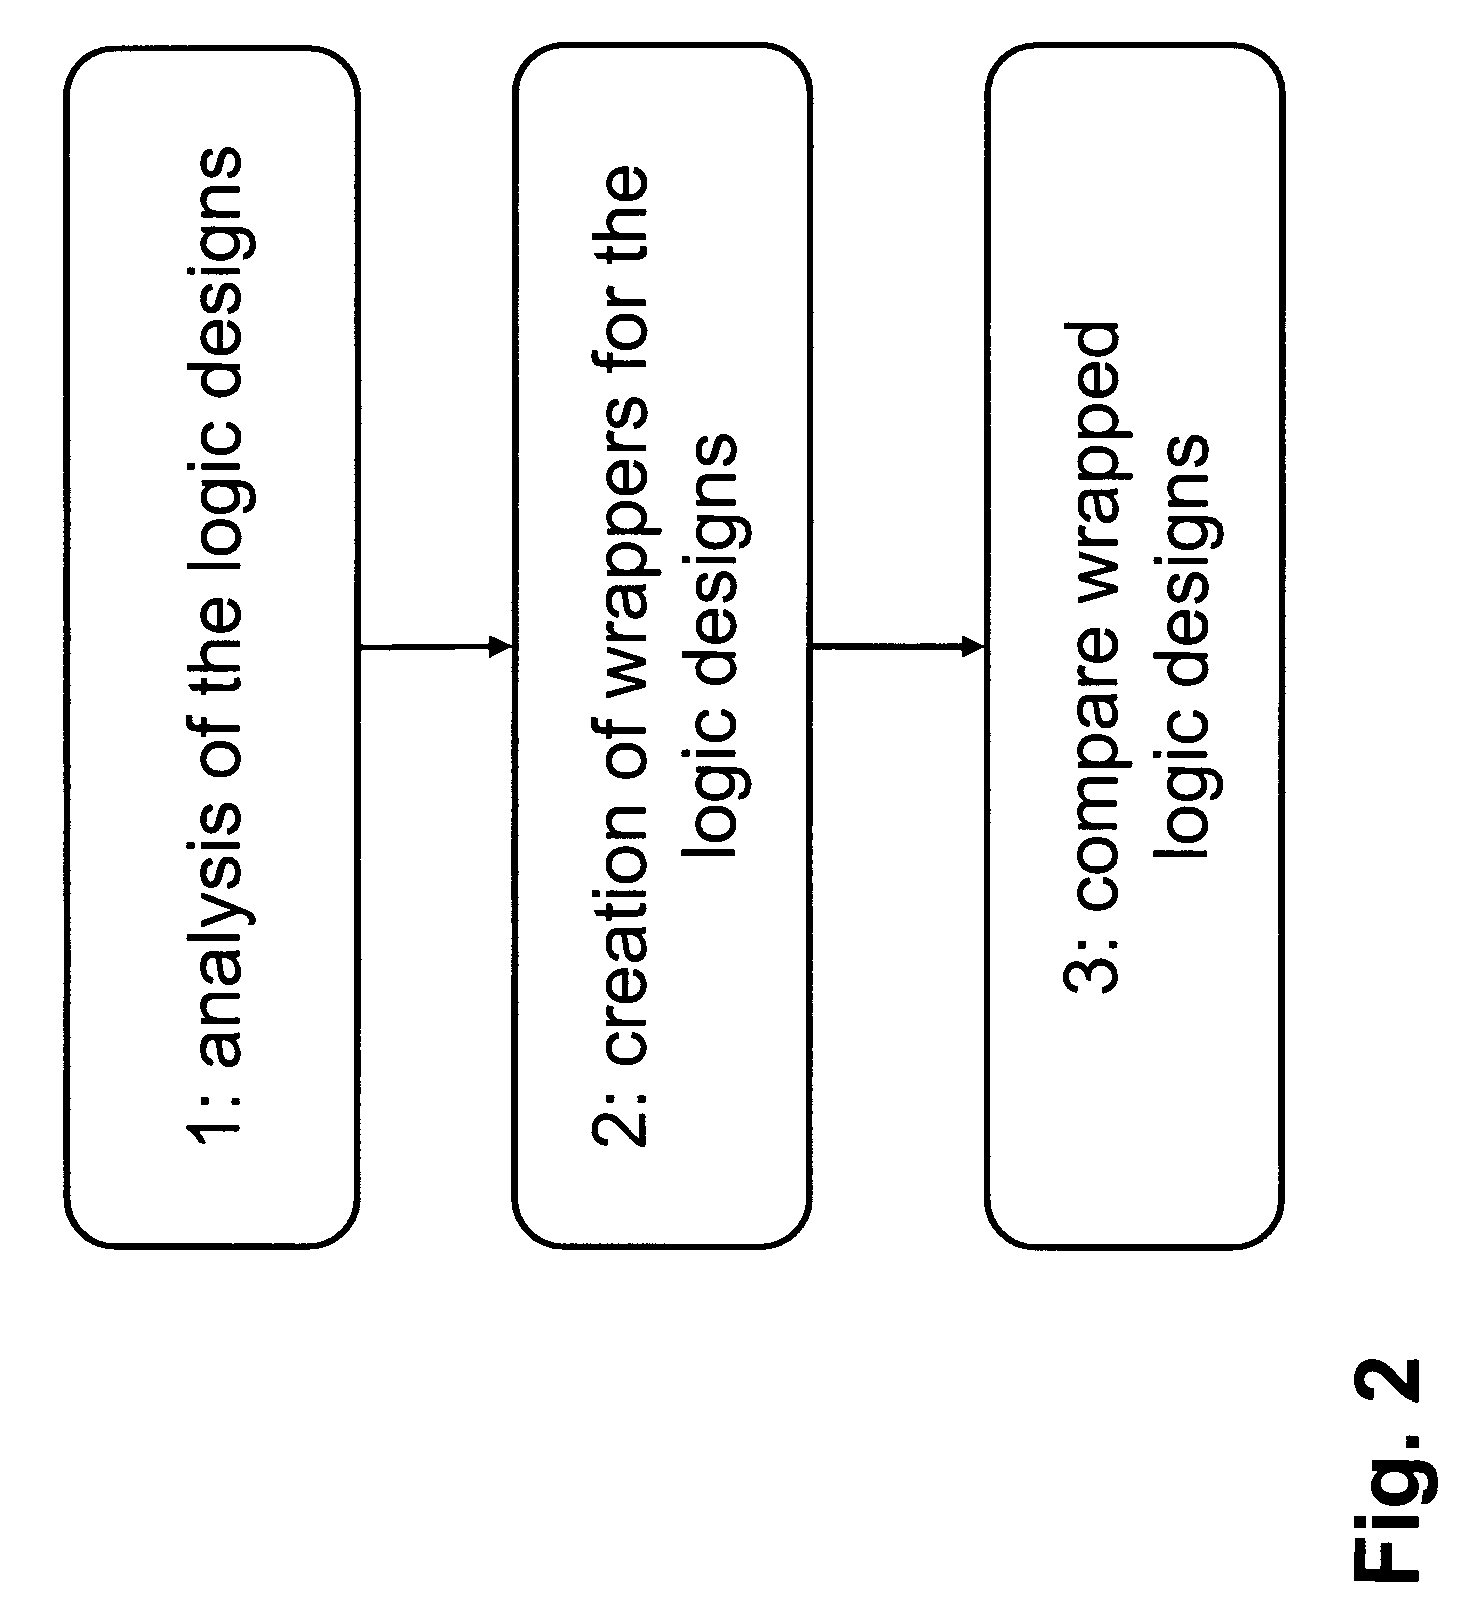 Method and system for verifying the equivalence of digital circuits